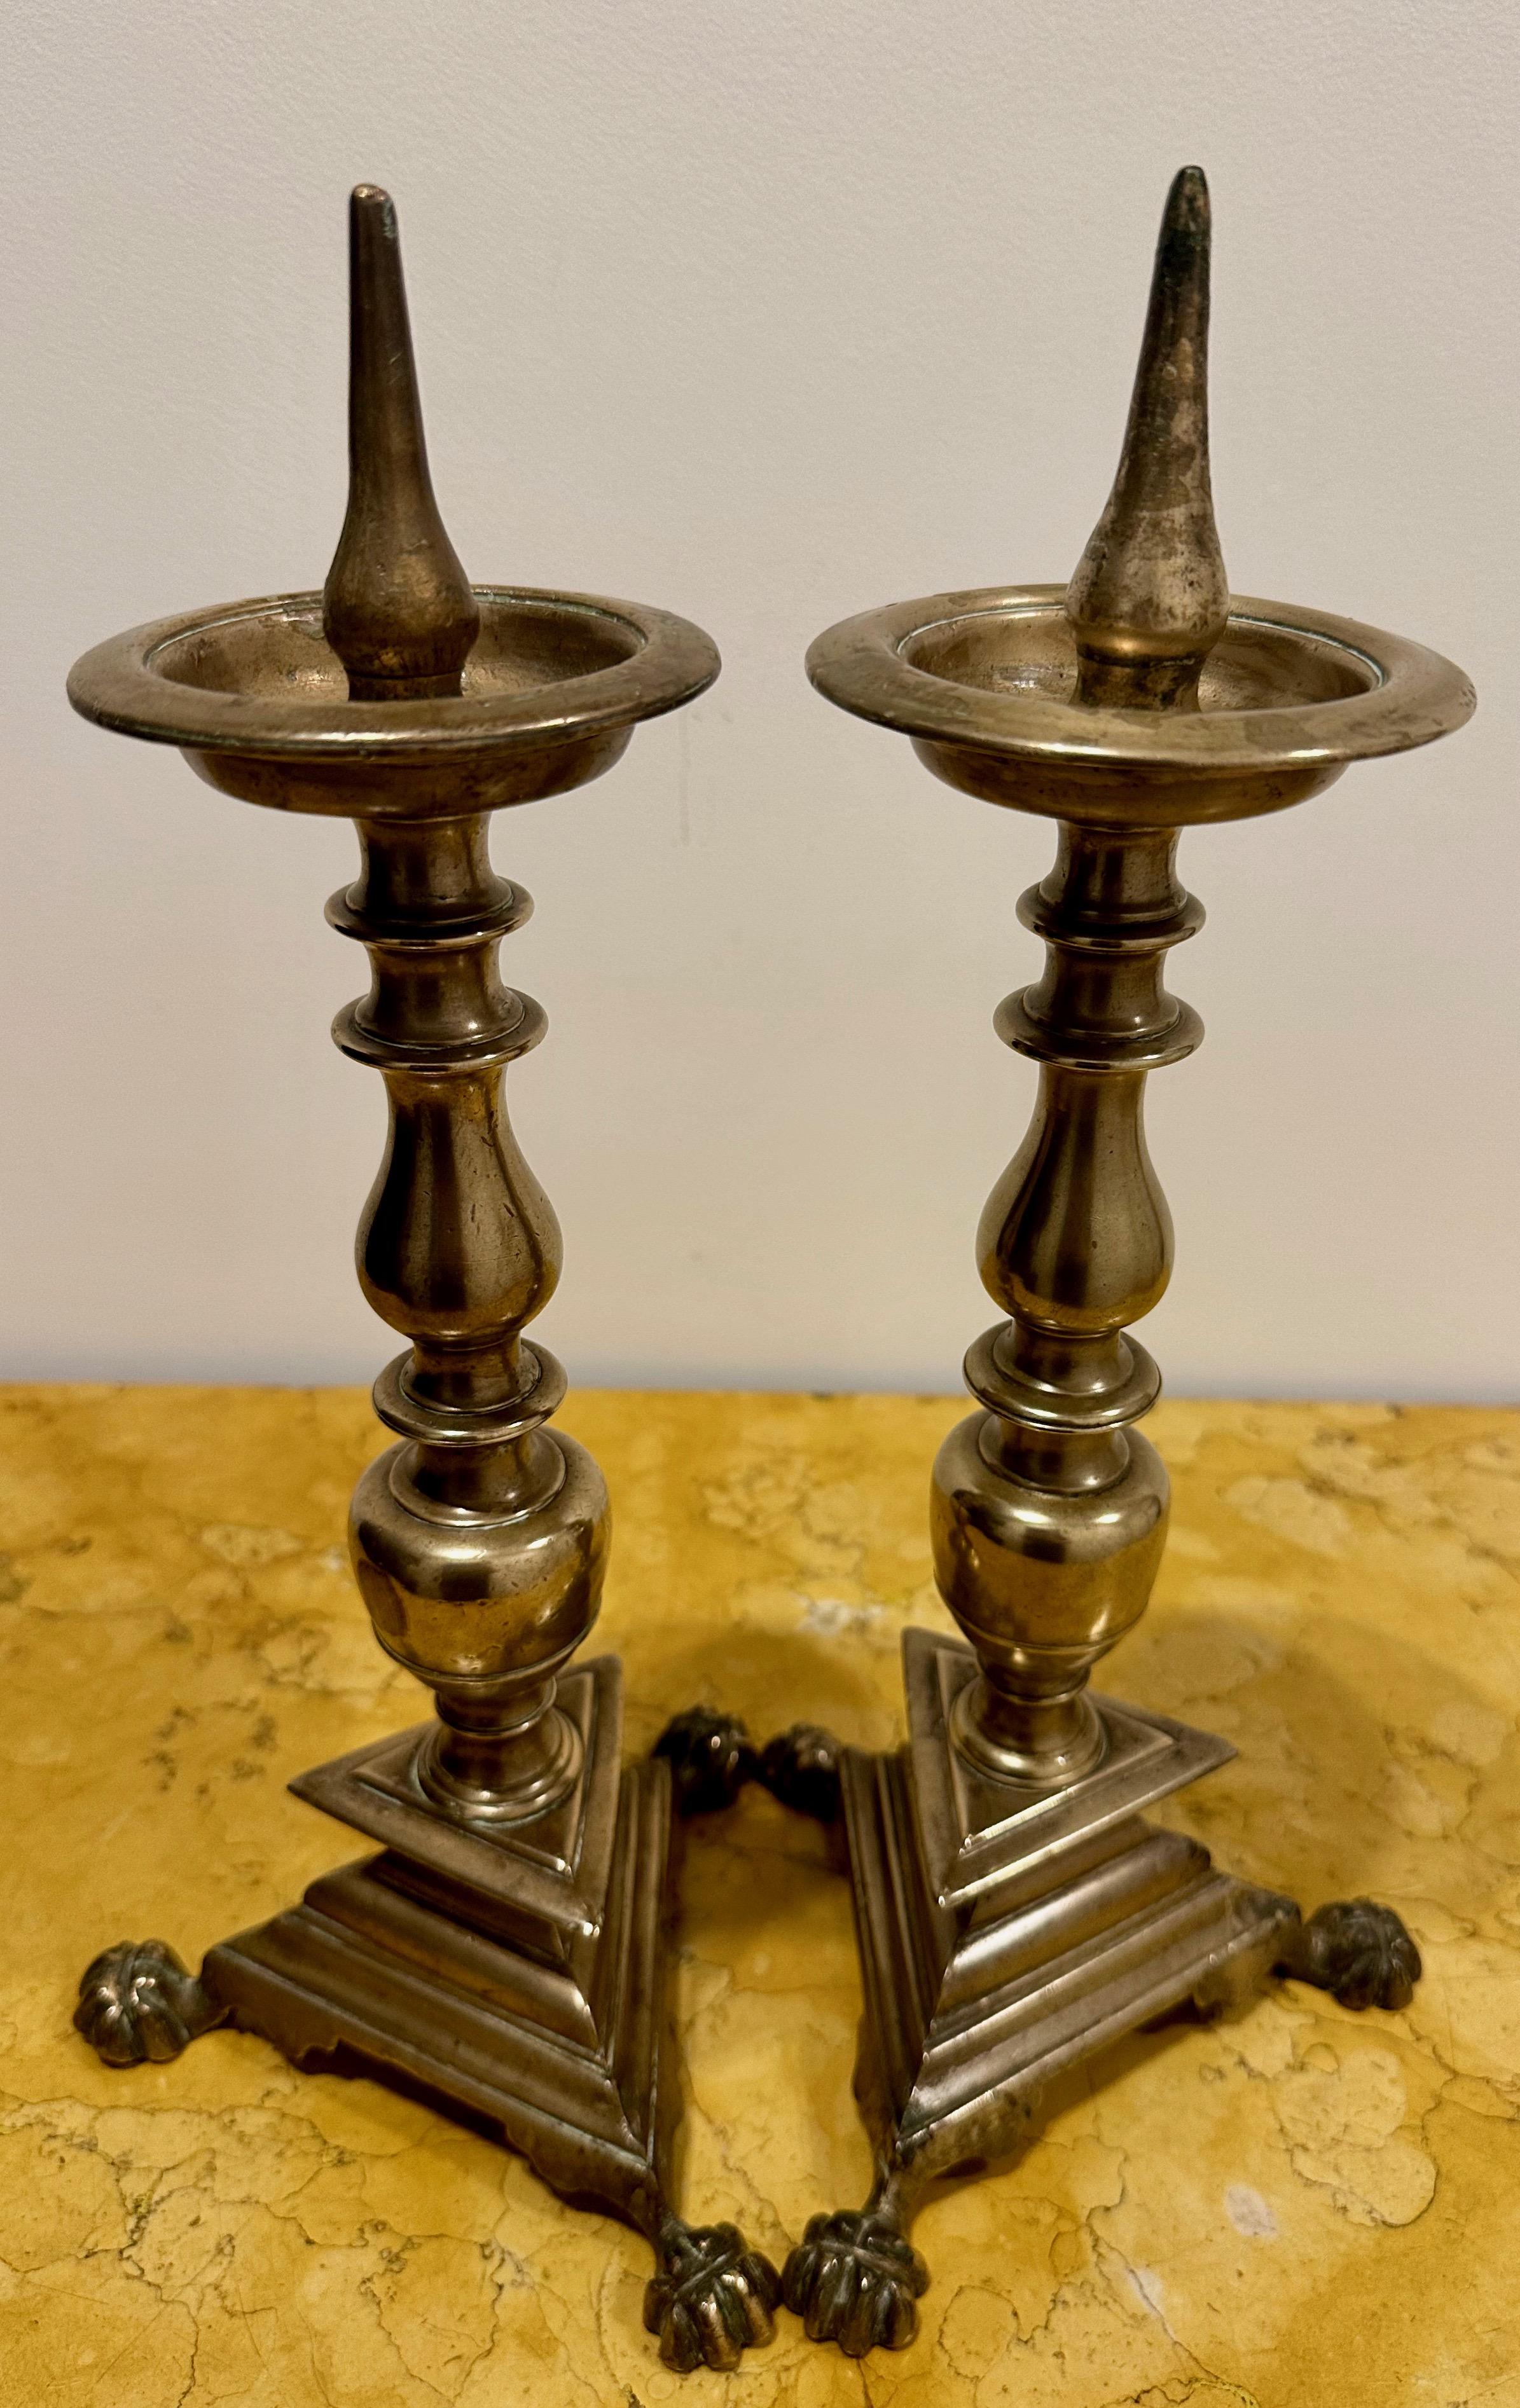 Italian Baroque, Pair of Bronze Pricked Candlesticks, 17th Century For Sale 3